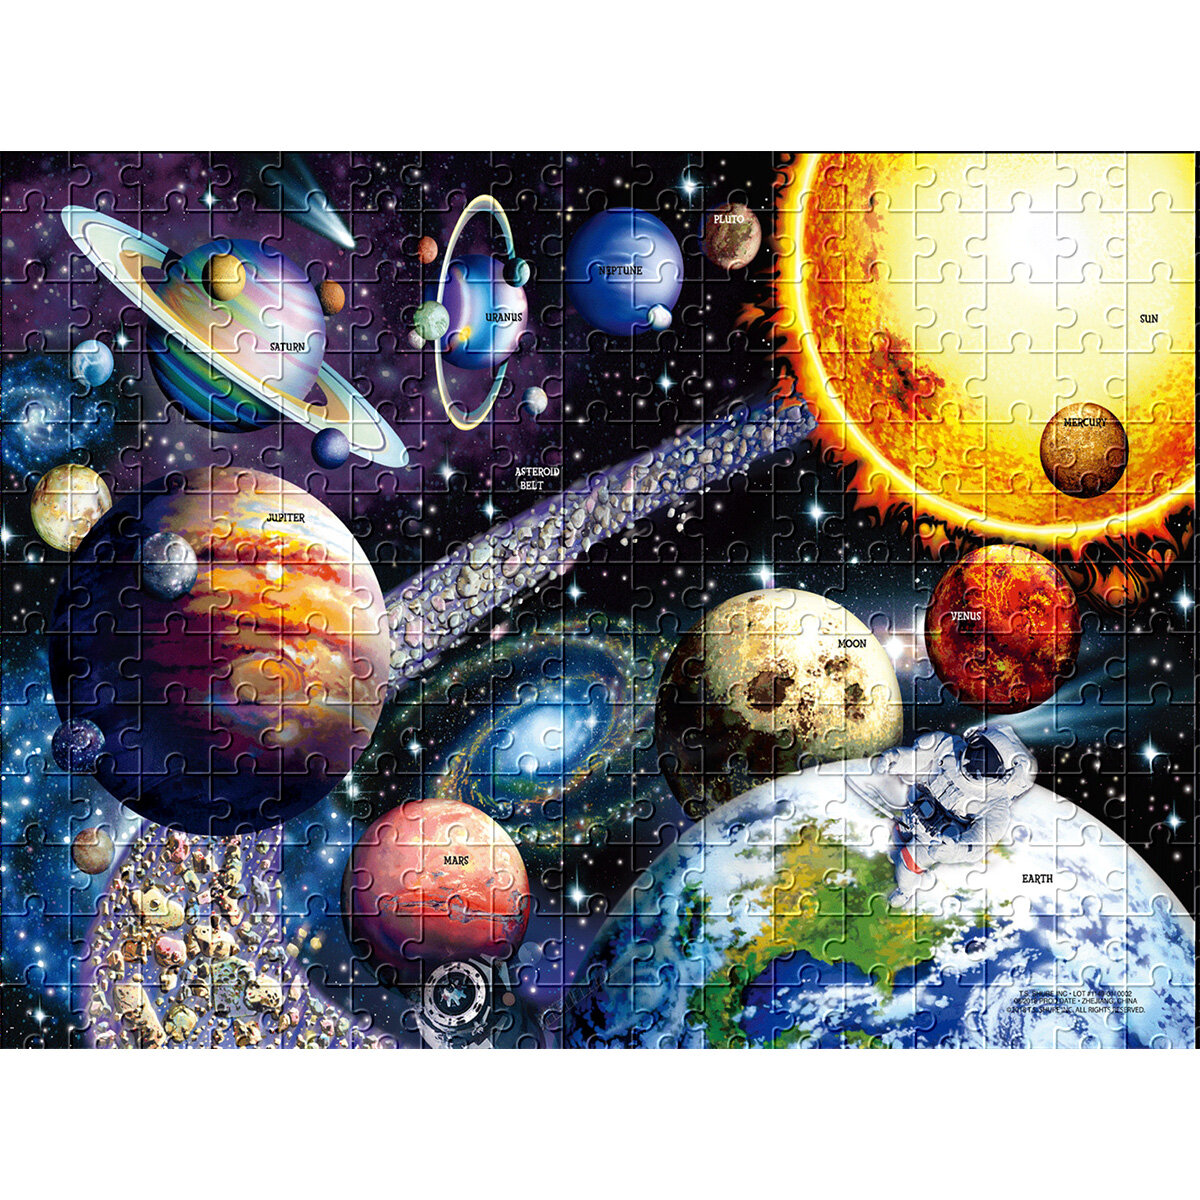 1000Pcs Jigsaw Puzzles Space Puzzles Solar System Planets Puzzles Cosmic Galaxy Puzzles Fun Family G